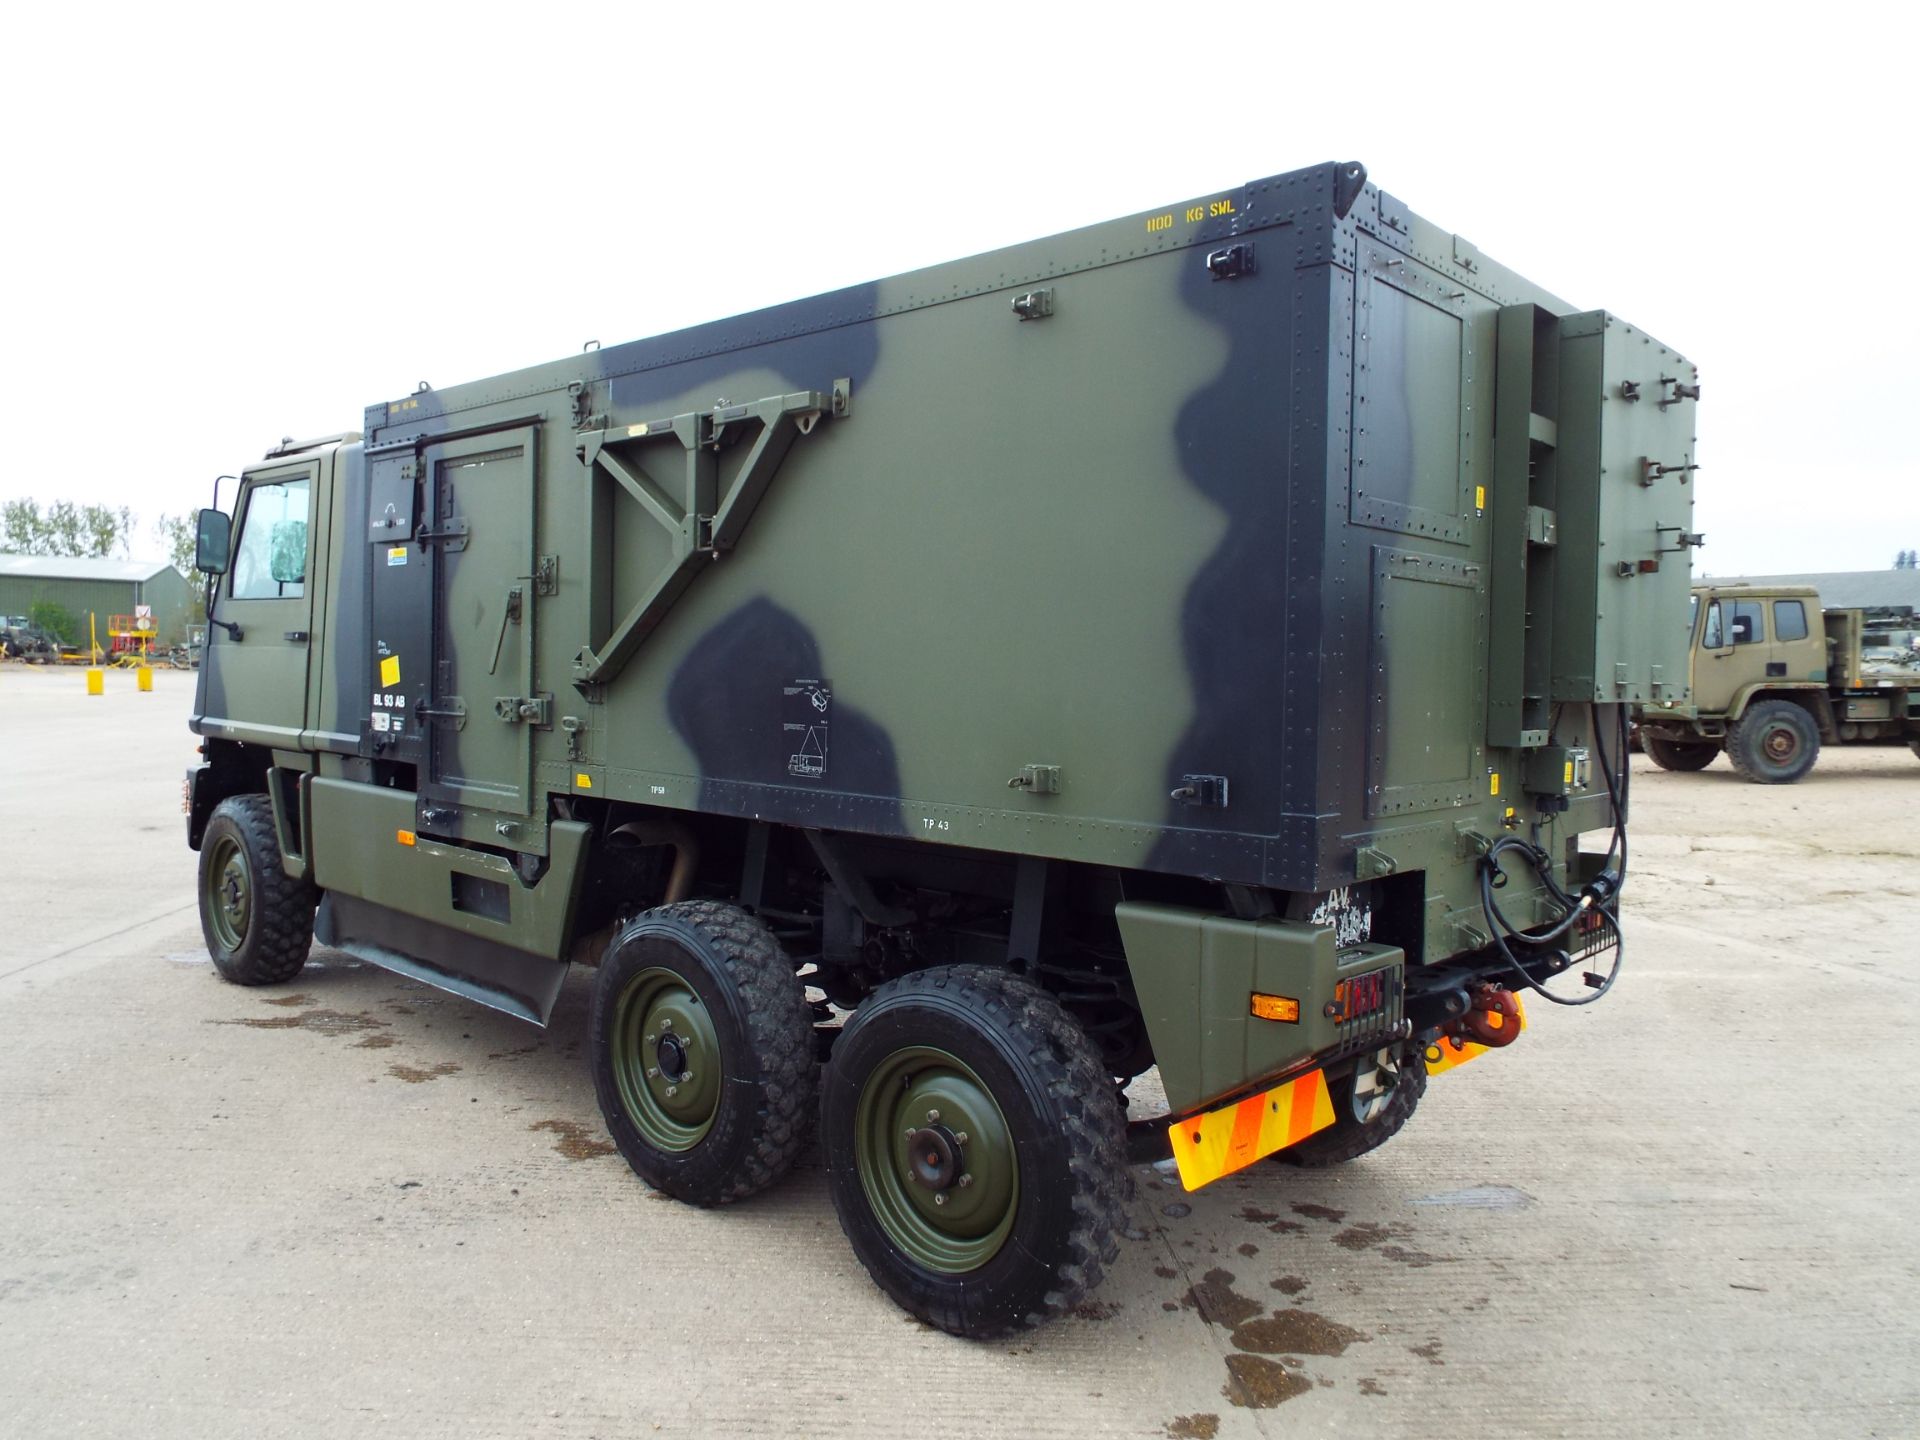 Ex Reserve Left Hand Drive Mowag Bucher Duro II 6x6 High-Mobility Tactical Vehicle - Image 5 of 28